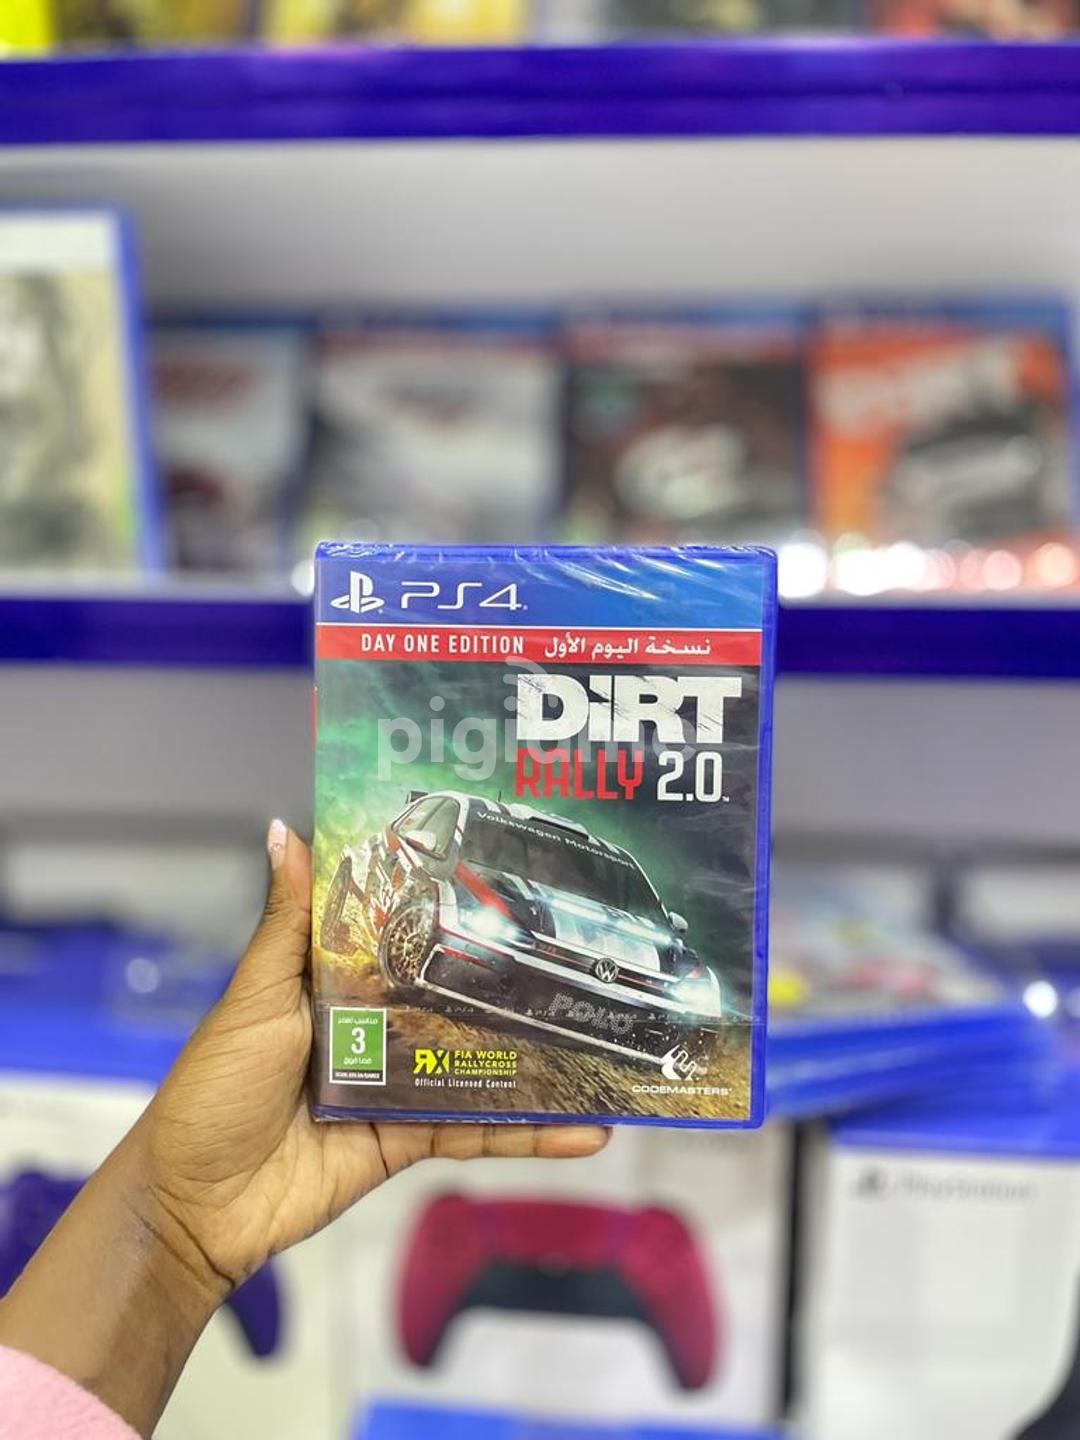 Dirt Rally - PS4 (Pre-owned)